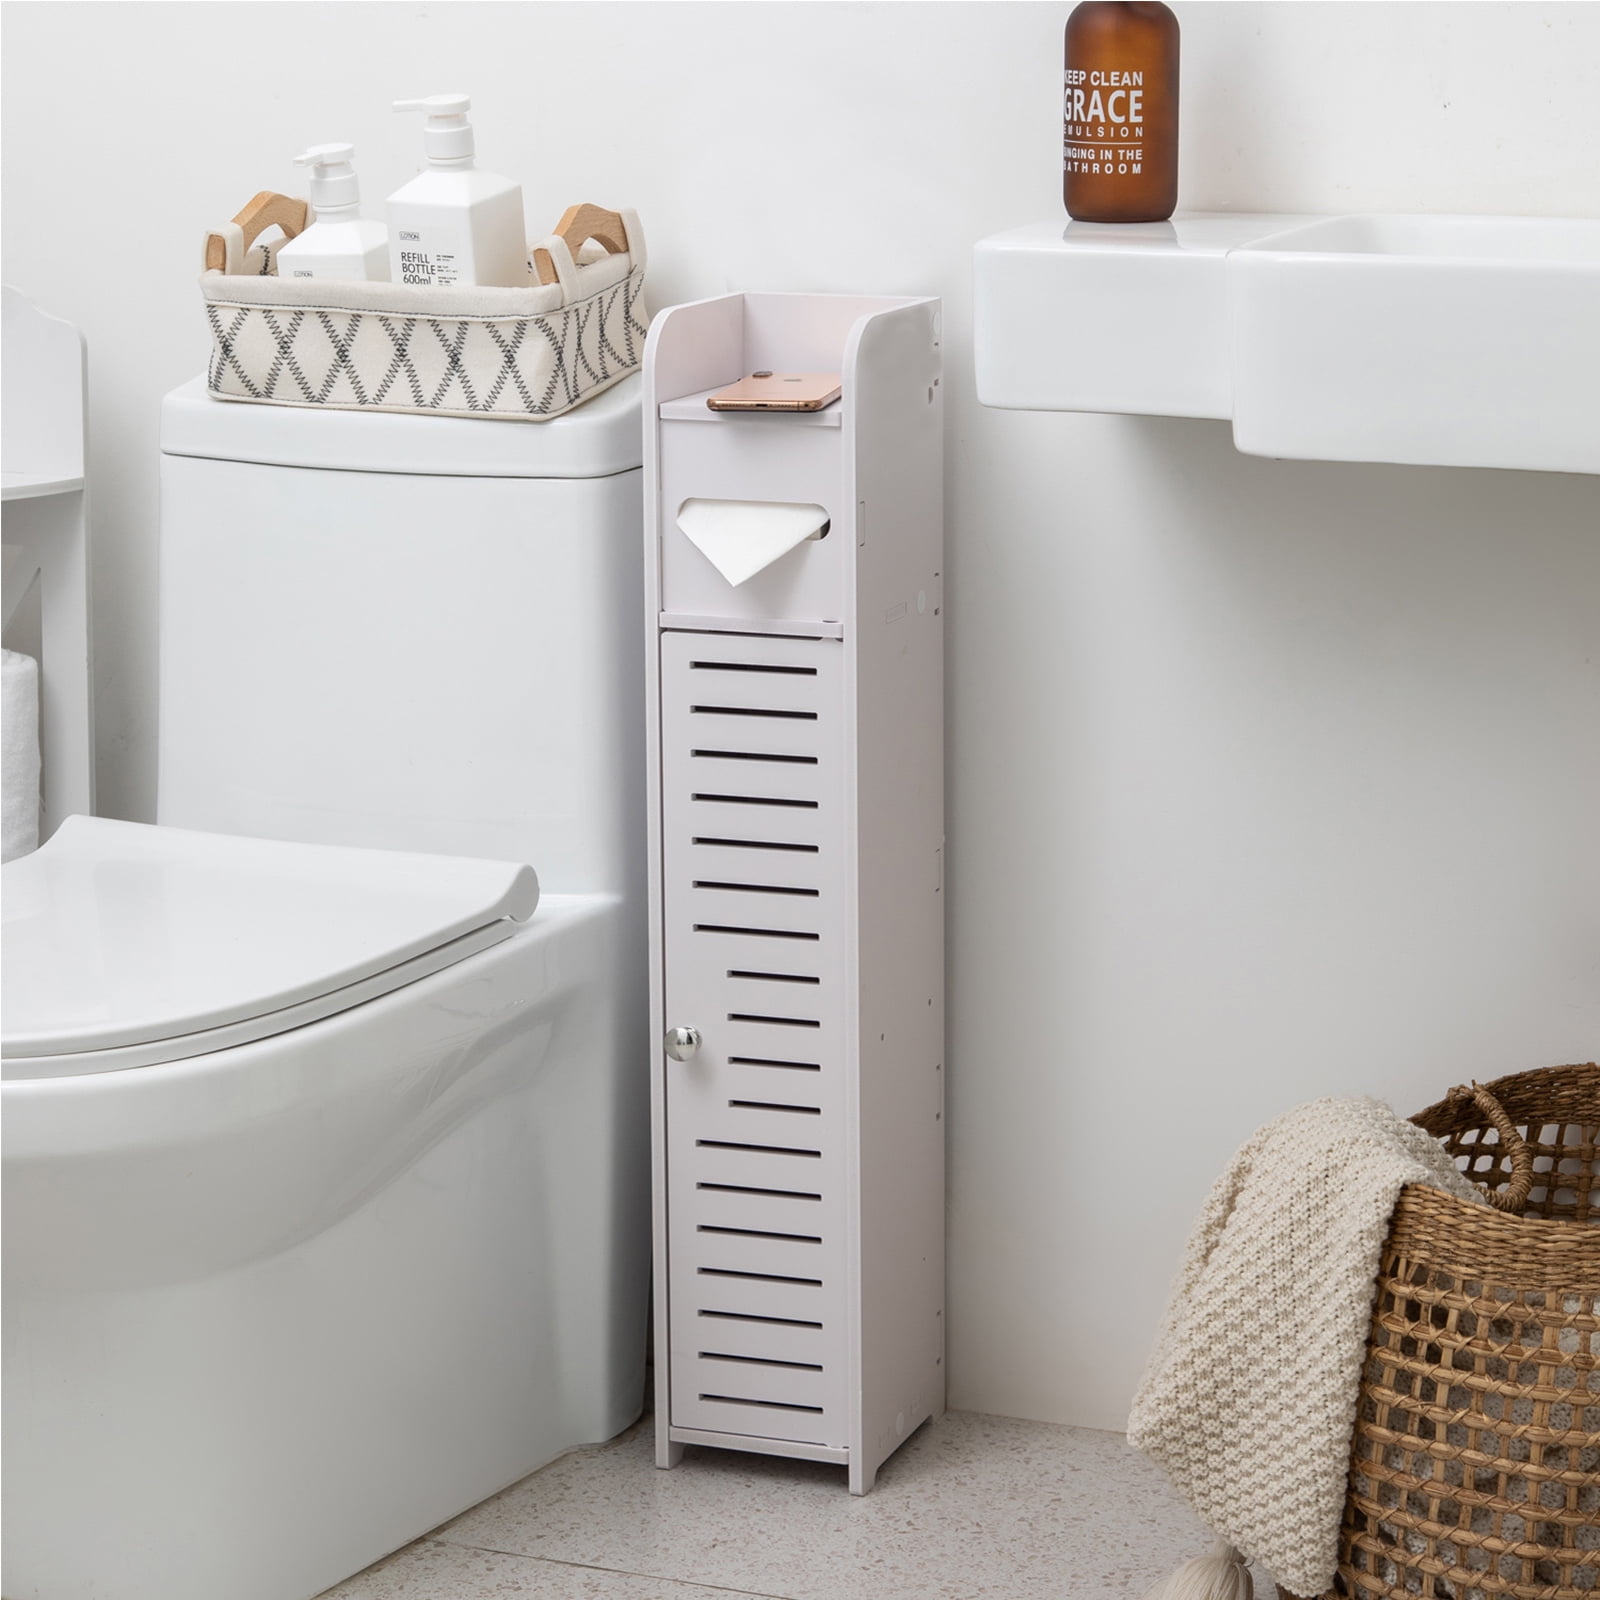  Forzater Narrow Bathroom Storage Cabinet, Slim Toilet Paper  Storage Cabinet for Small Spaces, White Waterproof Bathroom Furniture  Holding for Daily Use : Home & Kitchen